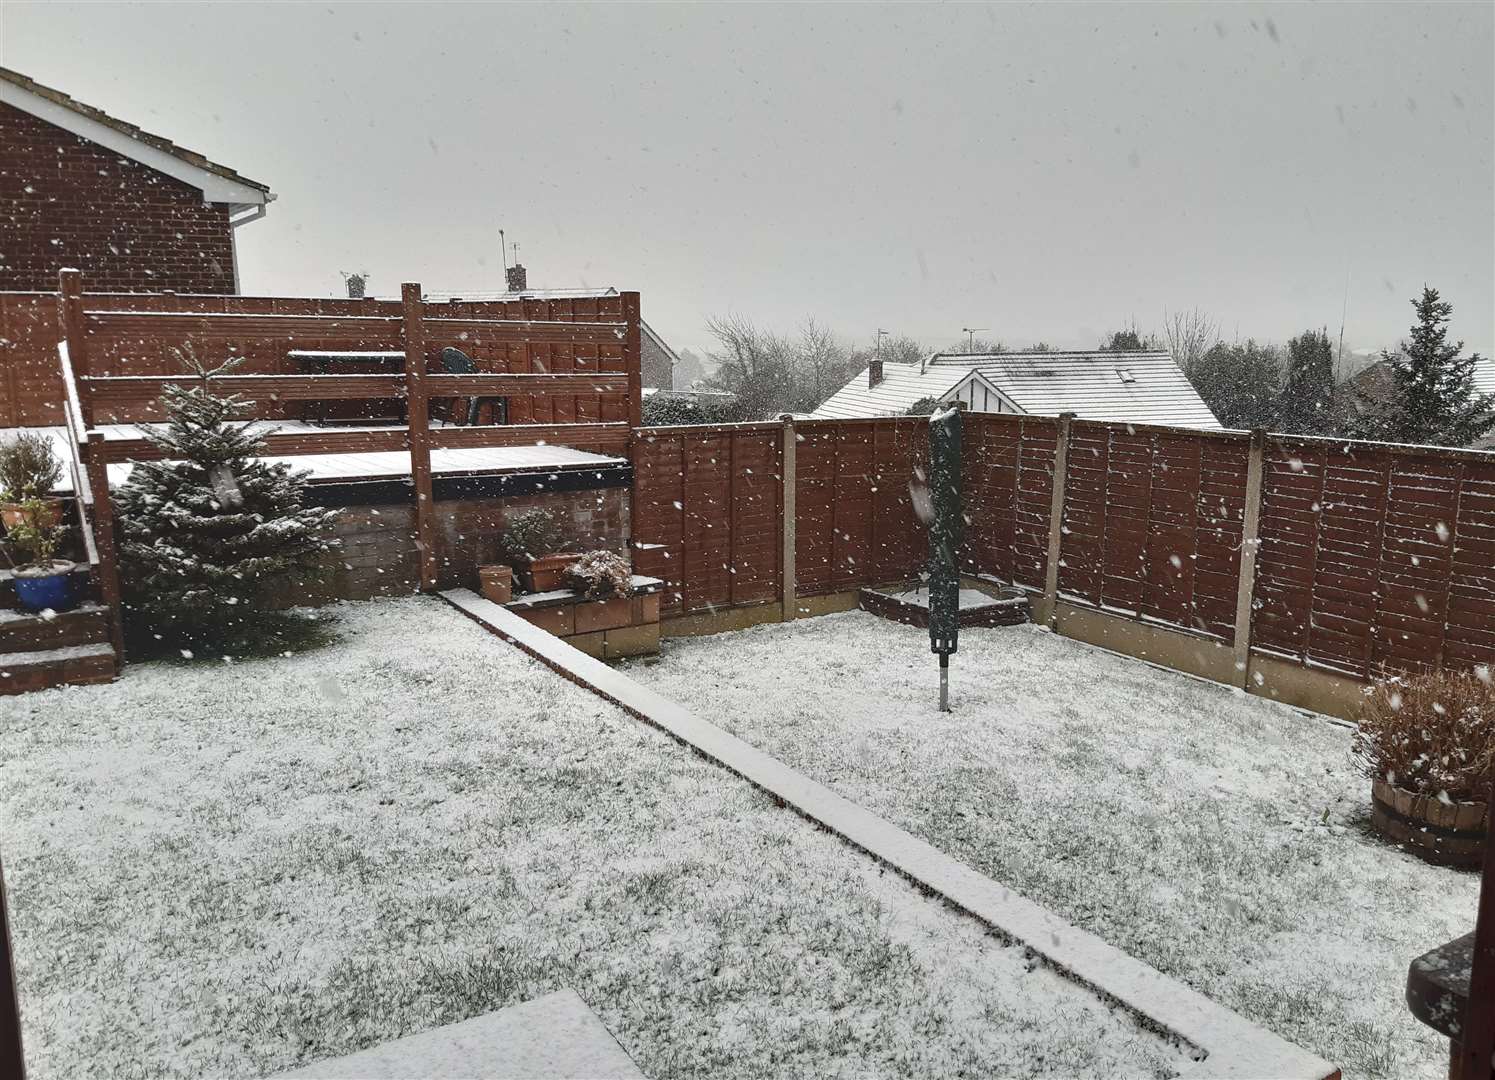 Snow falling in Cuxton, Medway